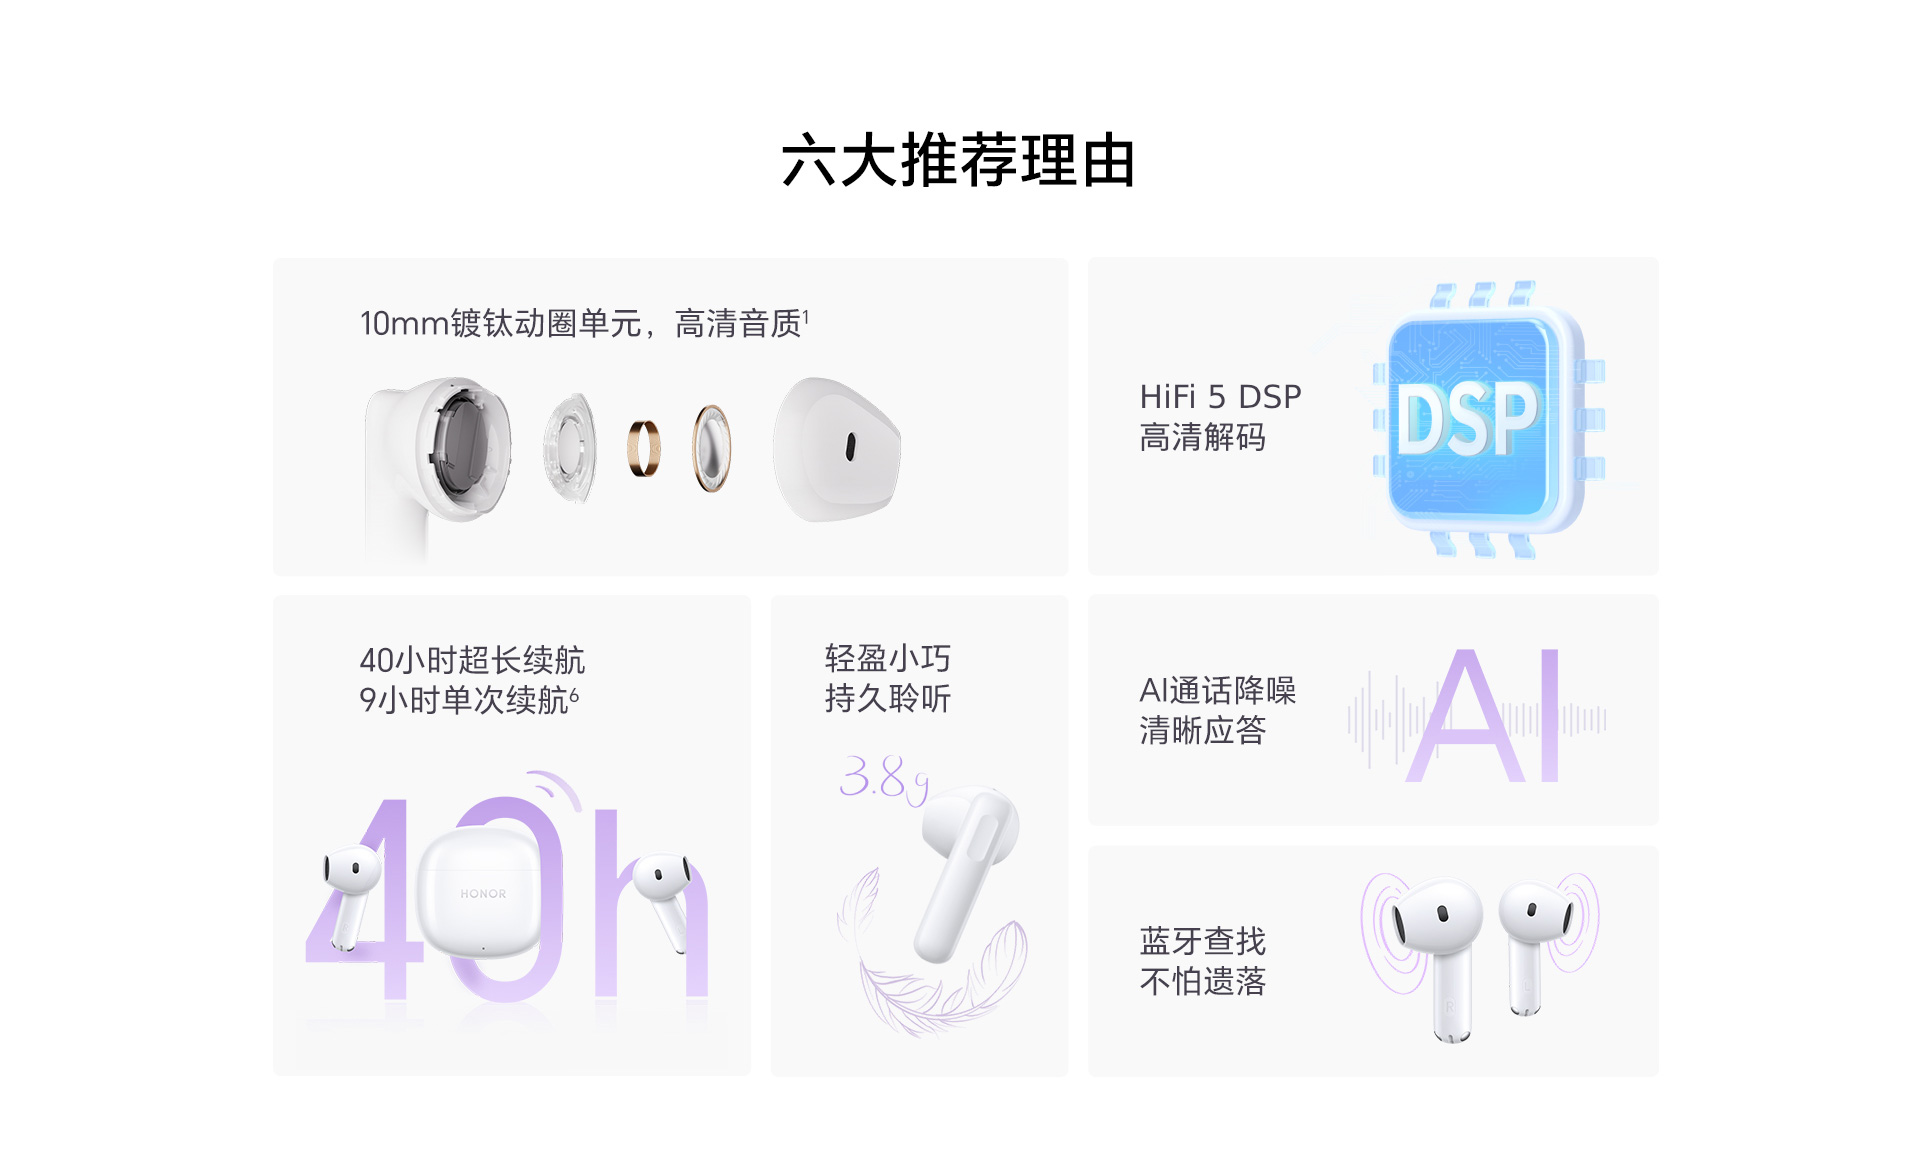 Honor Earbuds X6